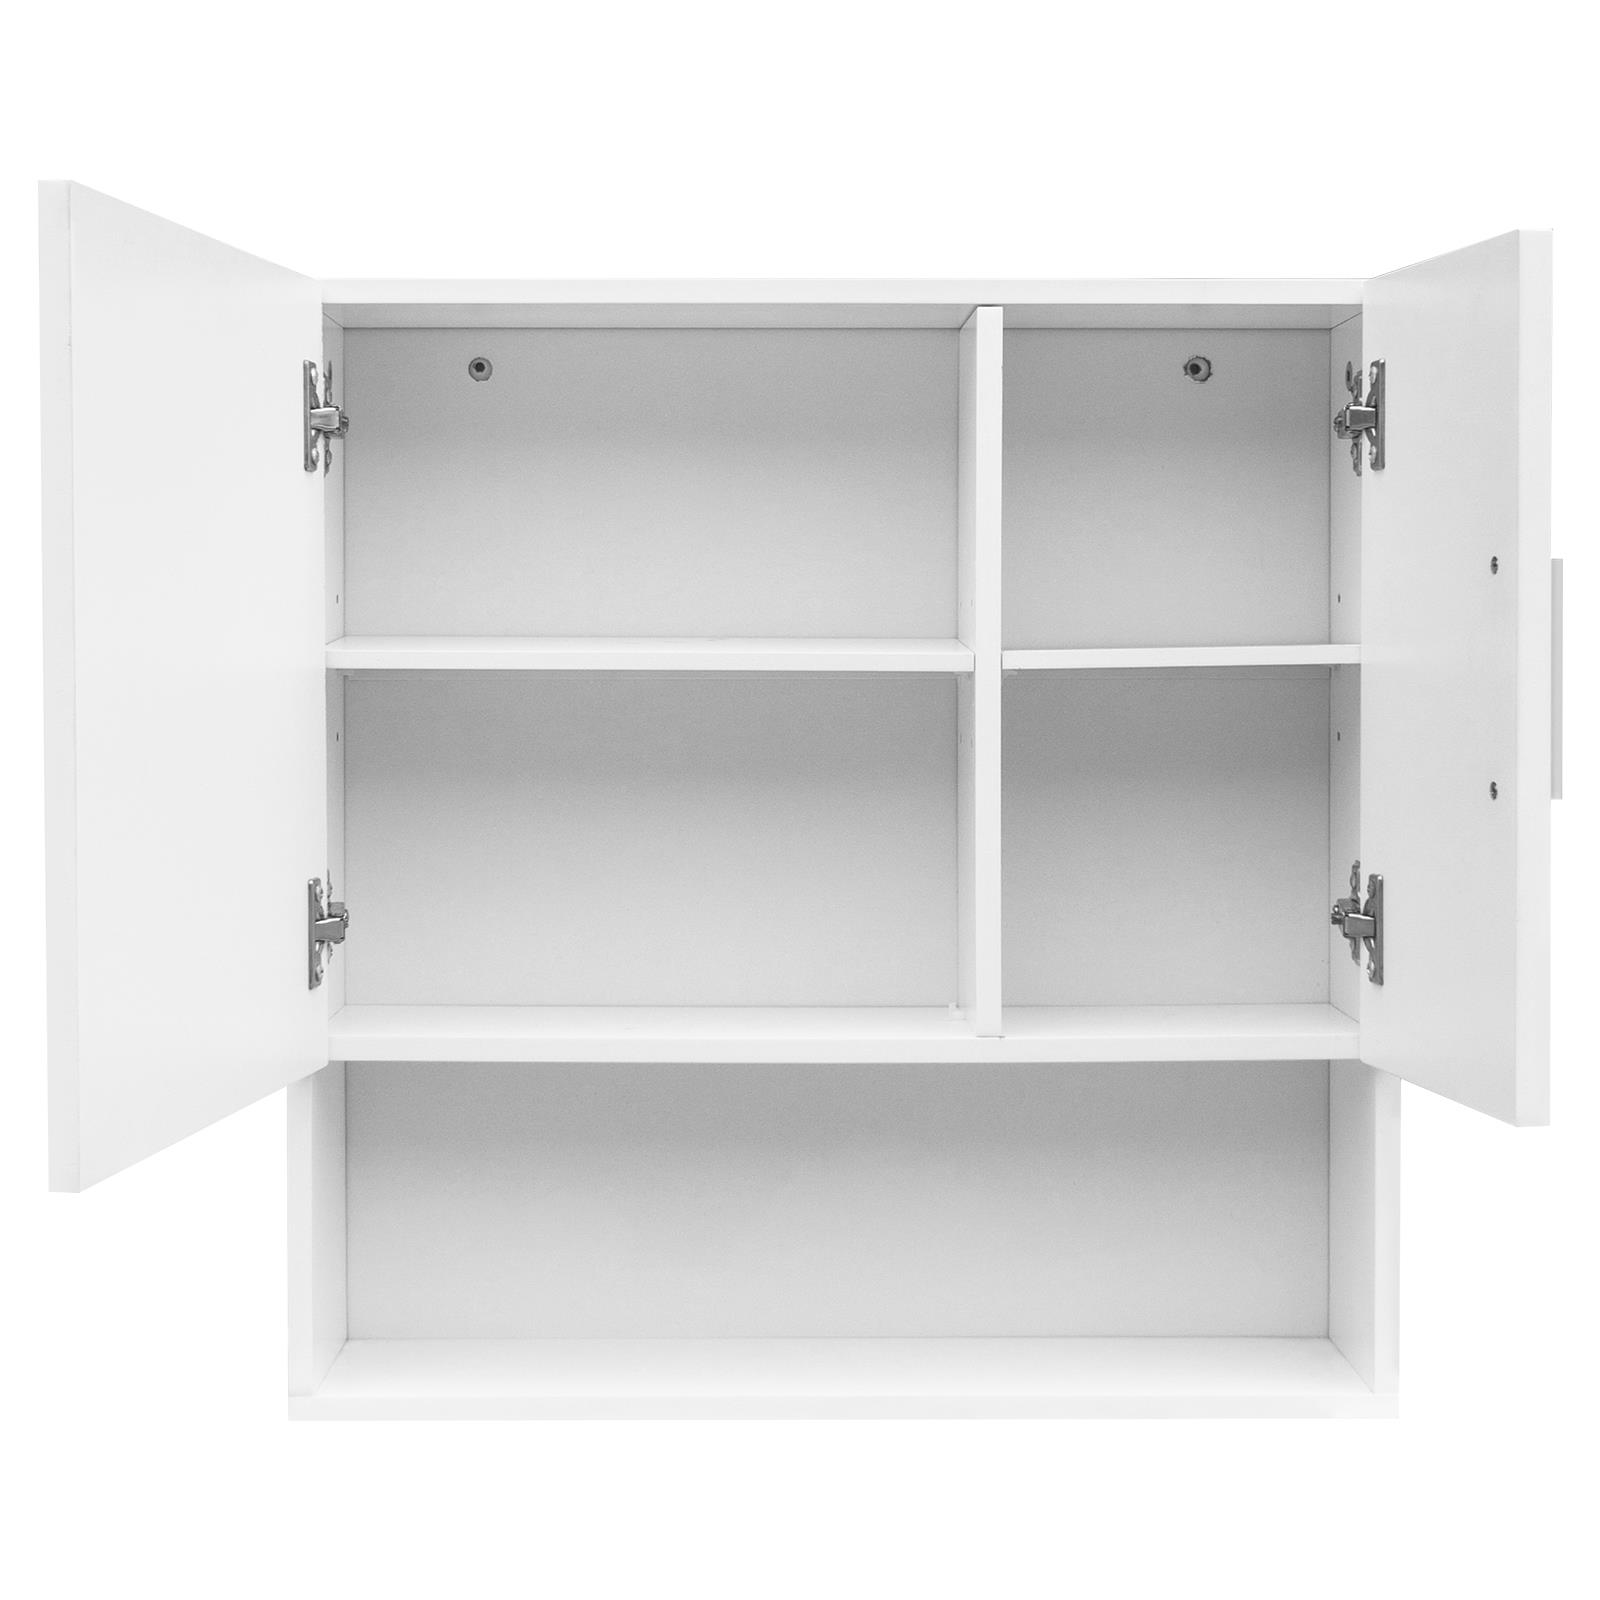 GoDecor Wall Storage Cabinet with mirror Doors and Shelf, Mirrored Wall Mounted Medicine Cabinet for Bathroom, White - image 3 of 5